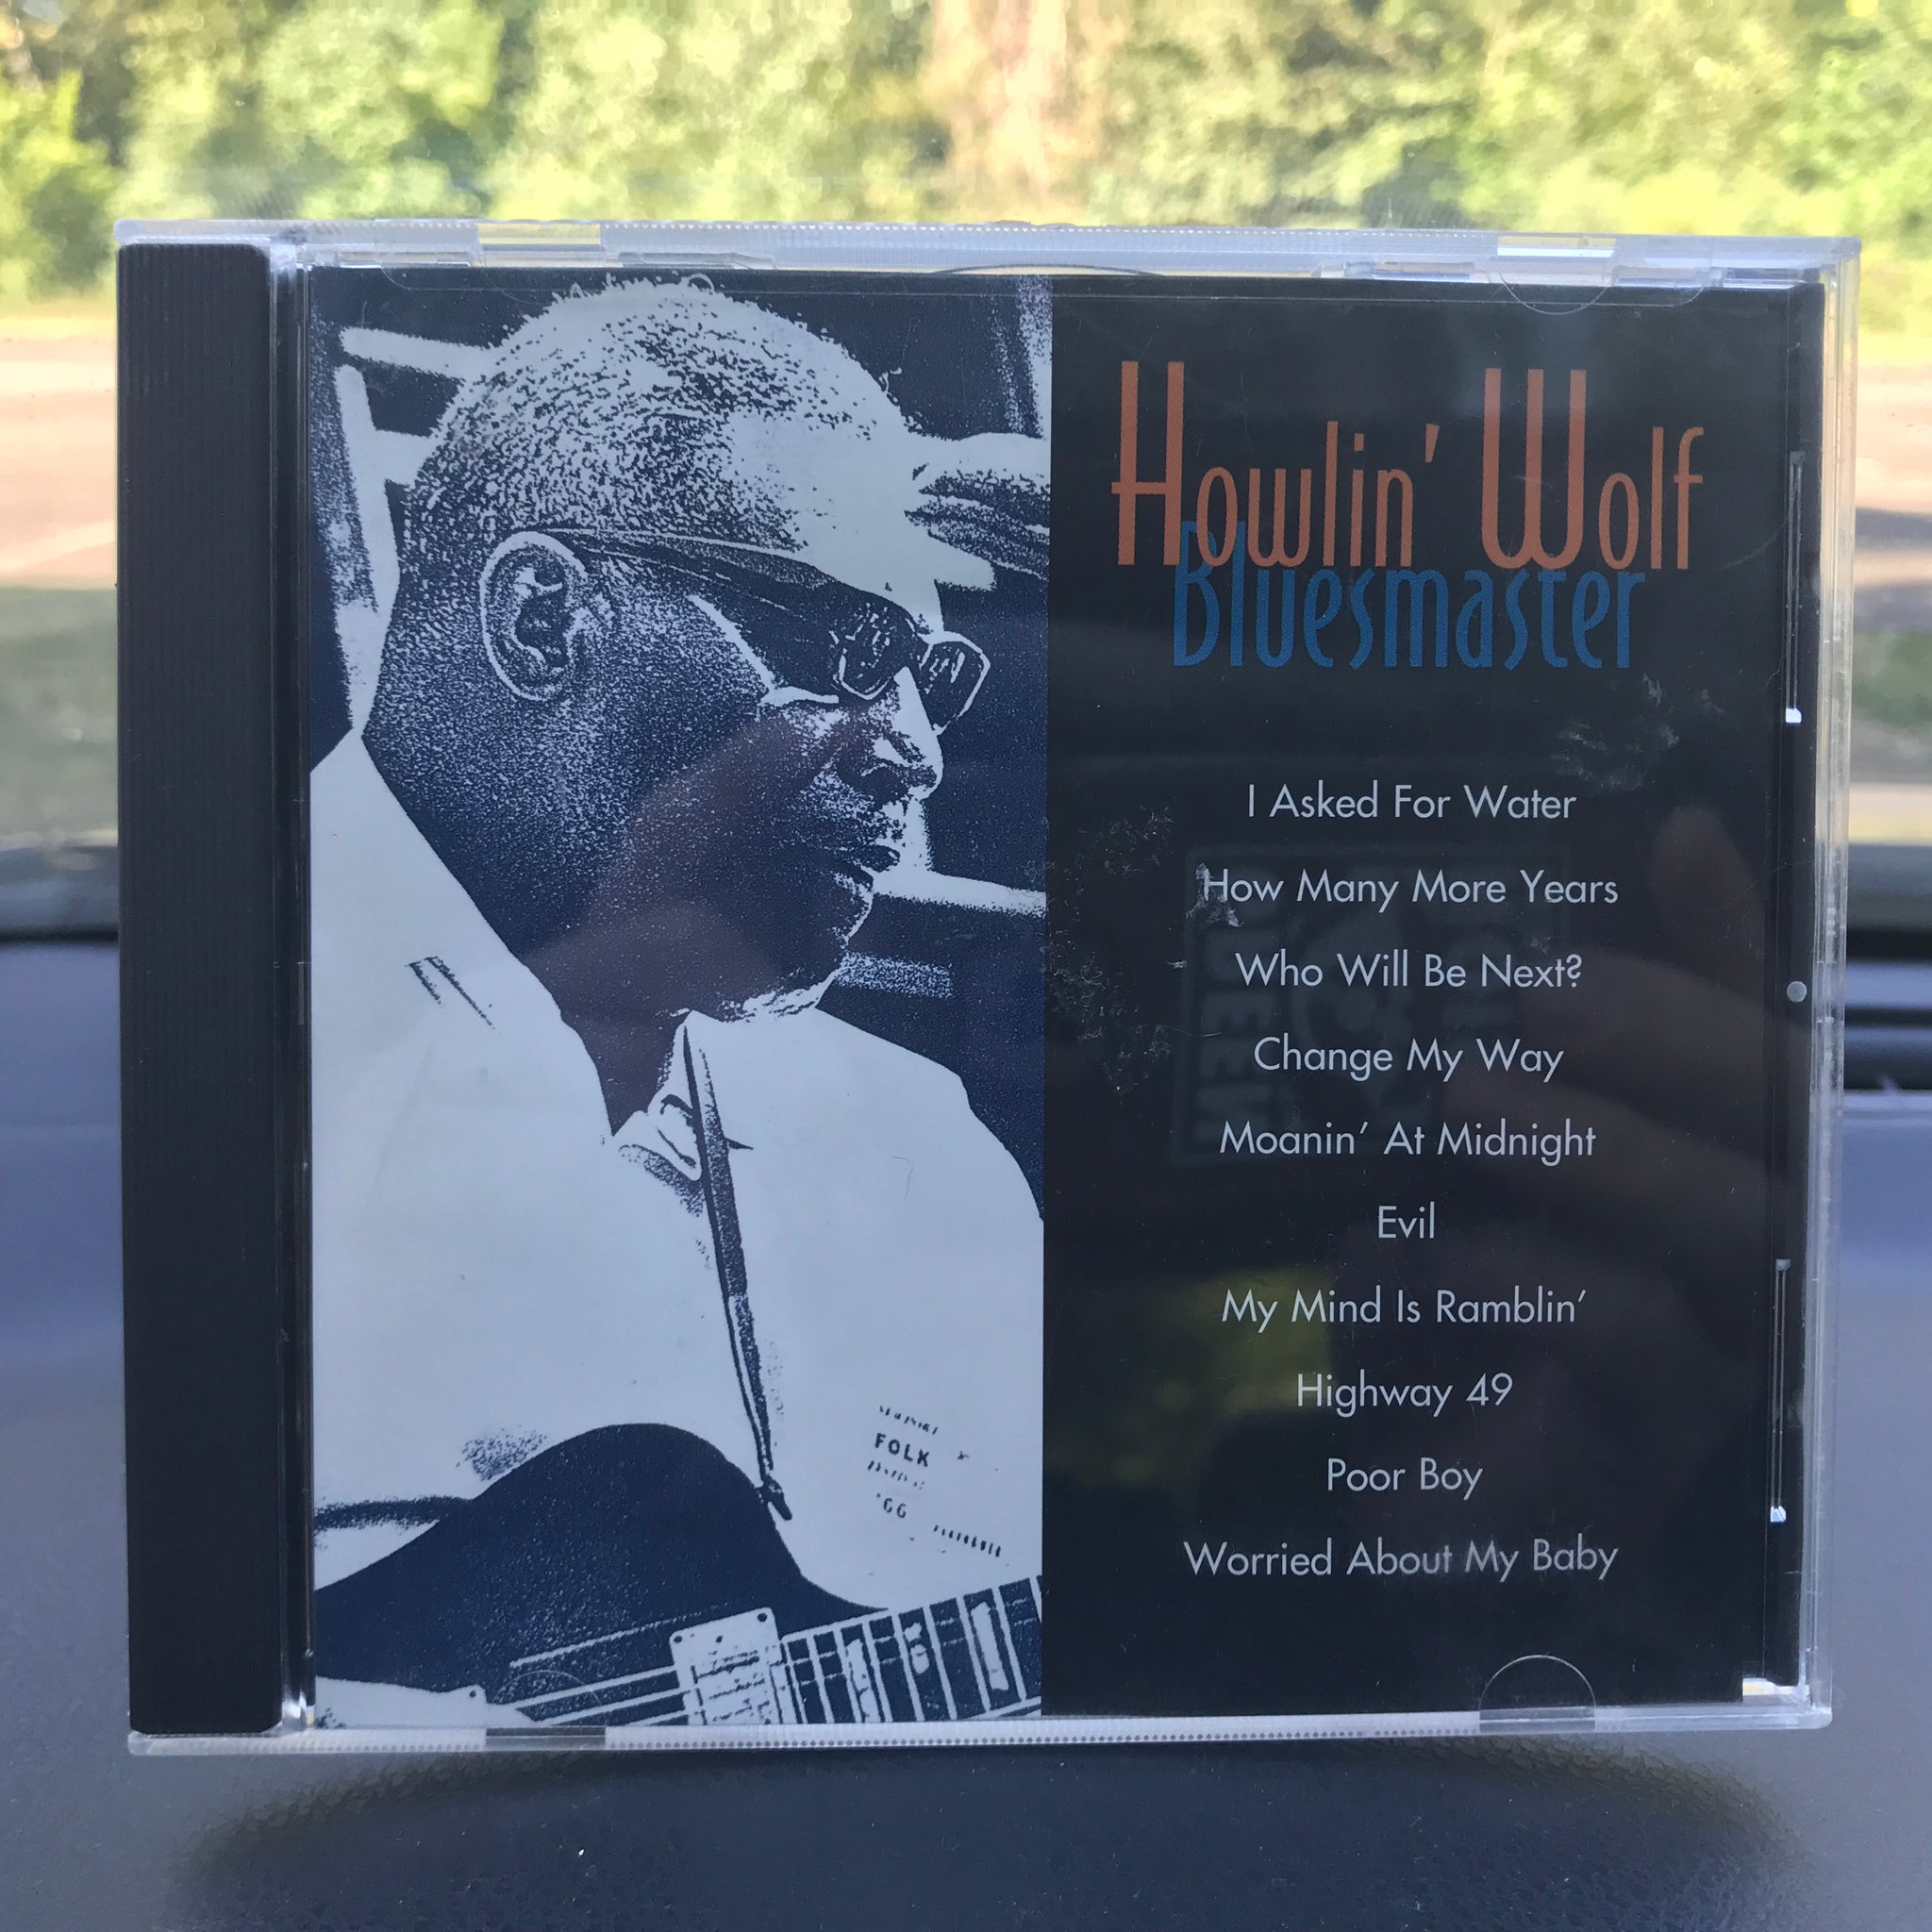 Howlin’ Wolf ‎– Blues Master– Used CD